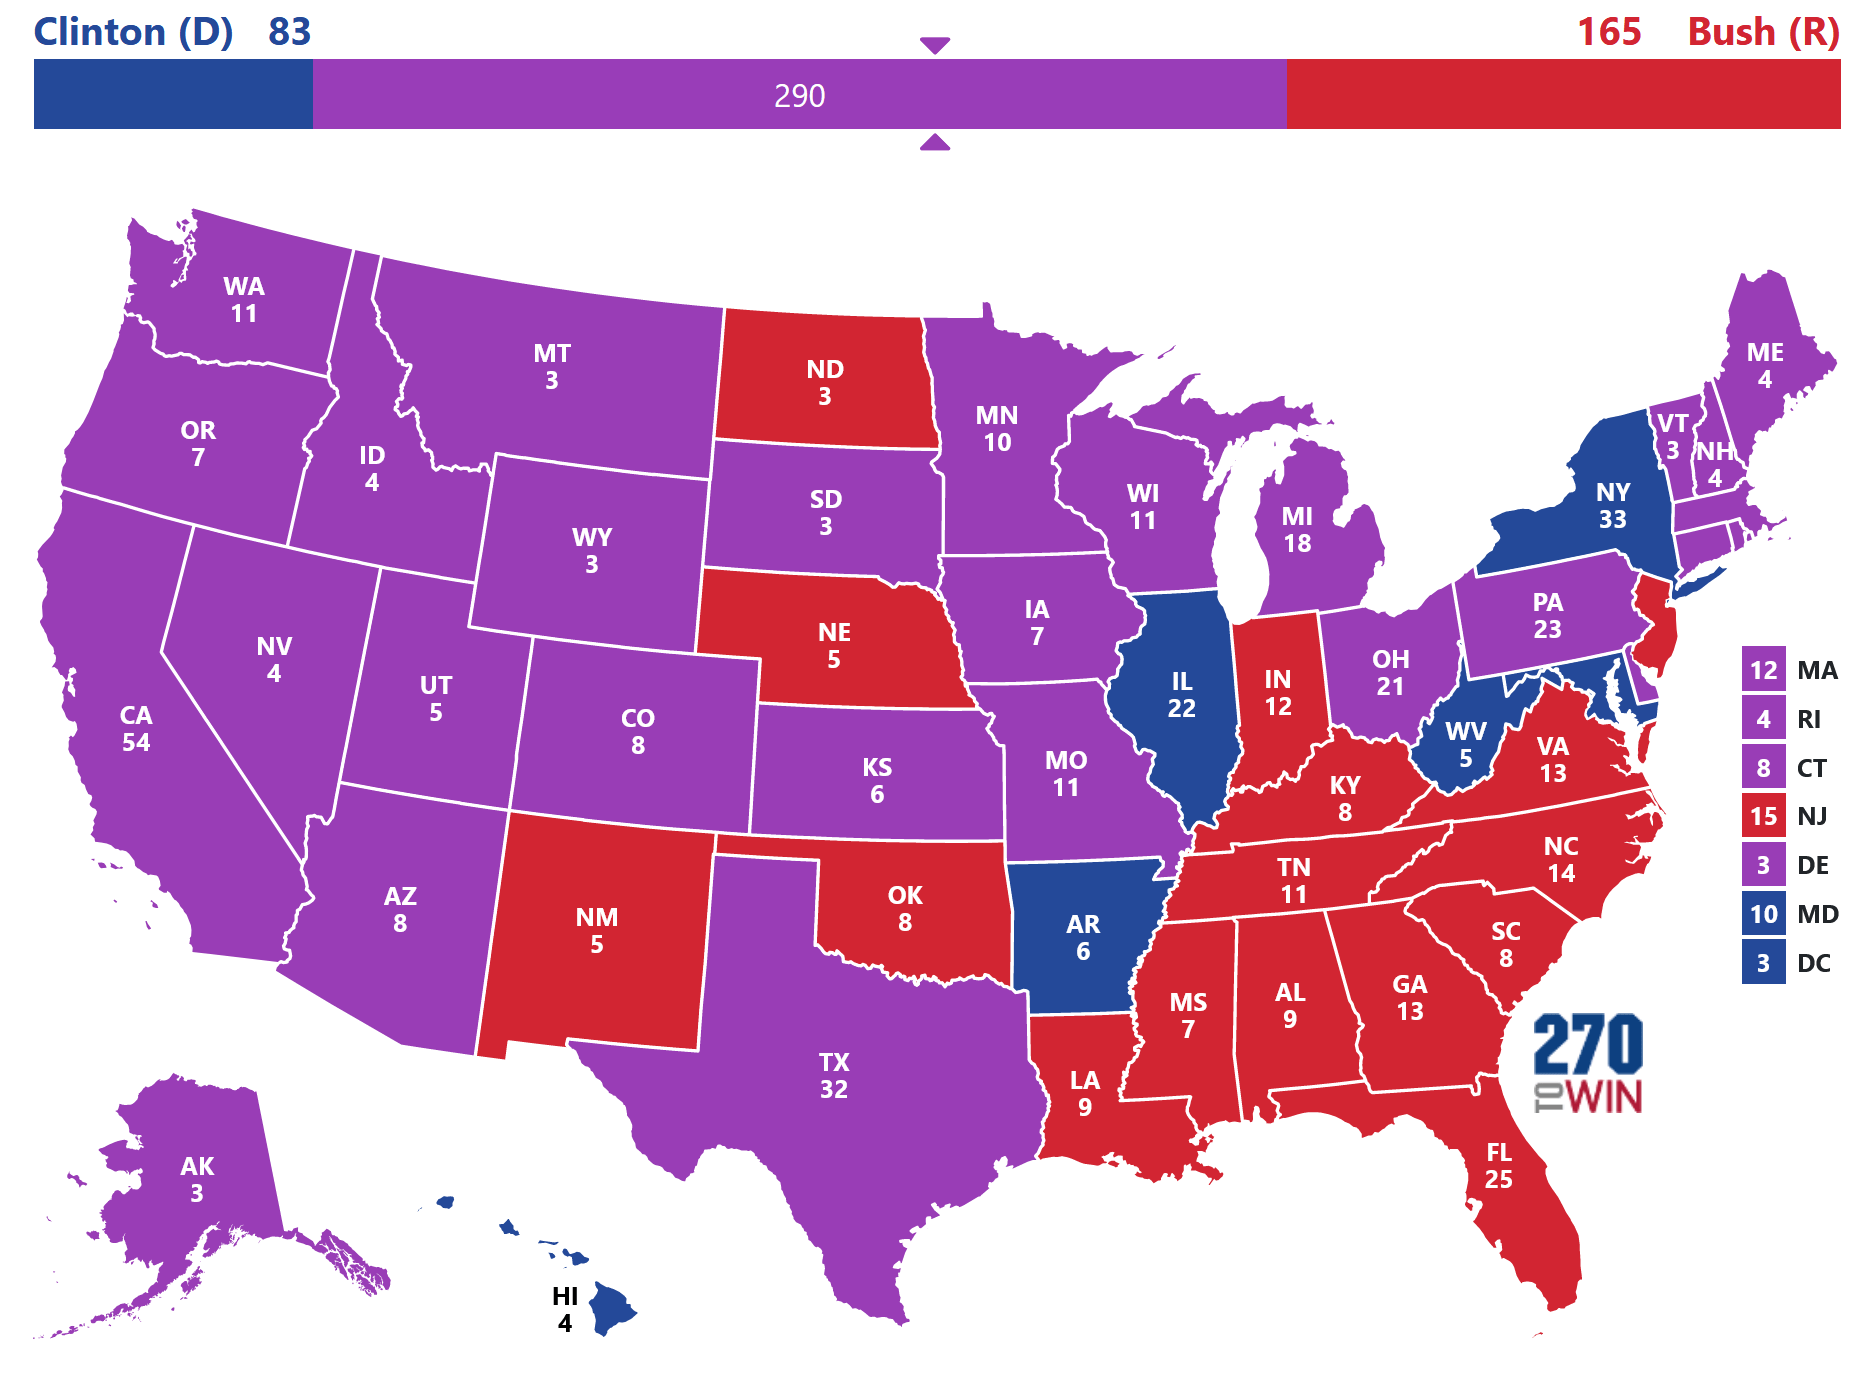 Perot's electoral map assuming a uniform swing to pre-dropout polling.